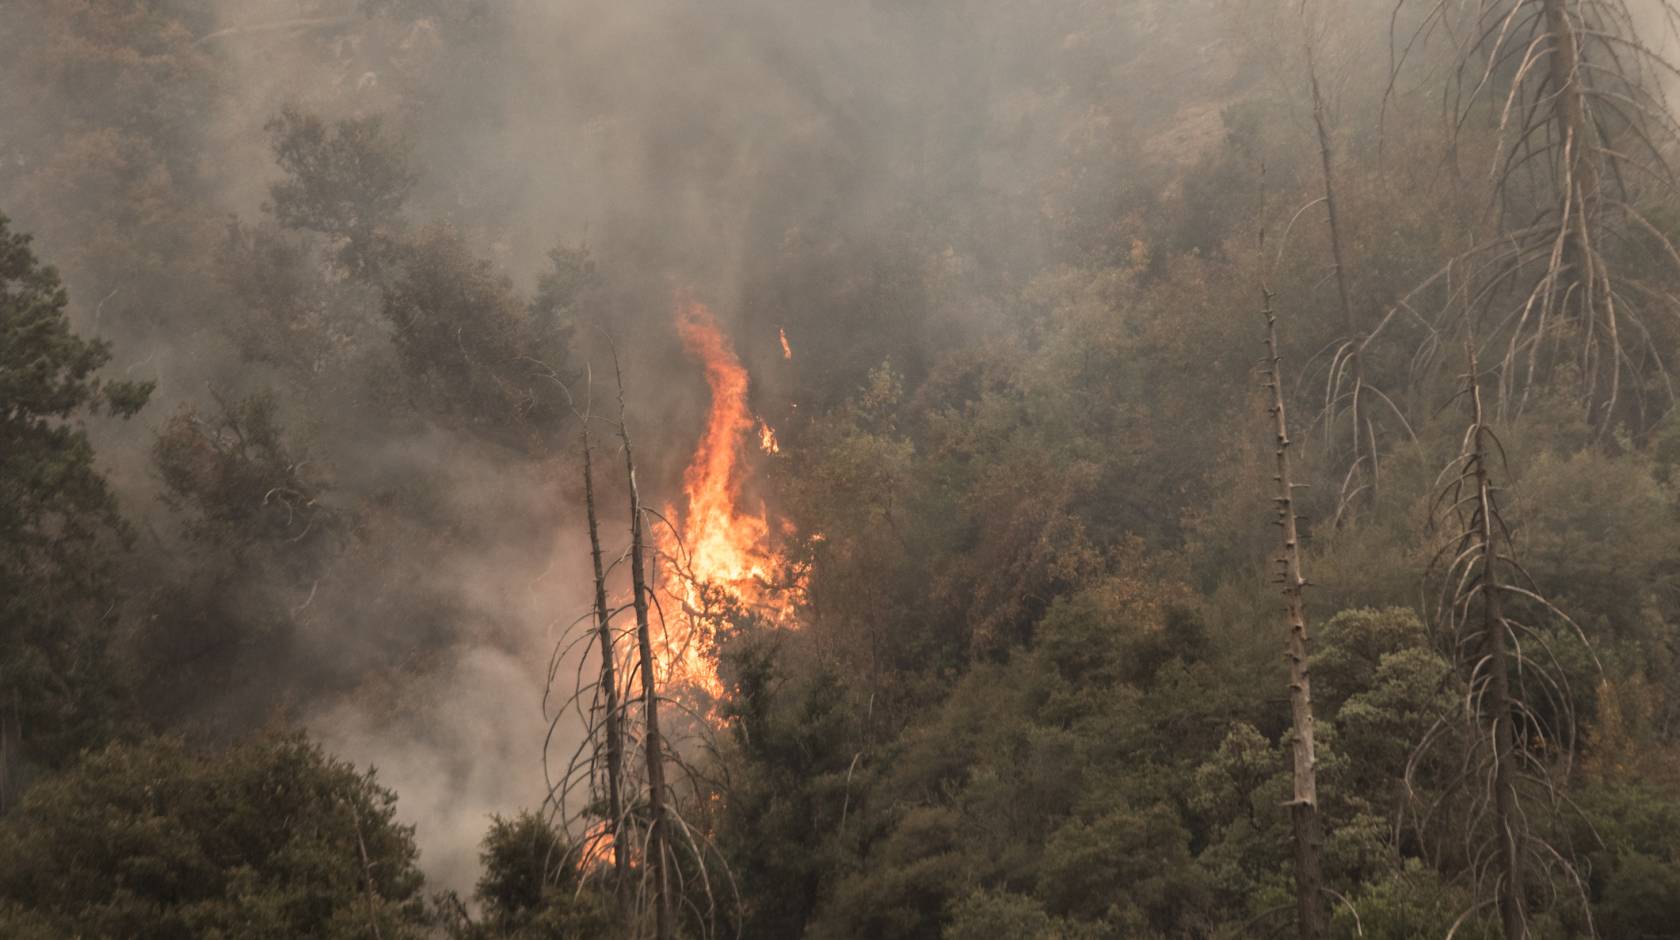 A wildfire burning in a forest in Yucaipa, California